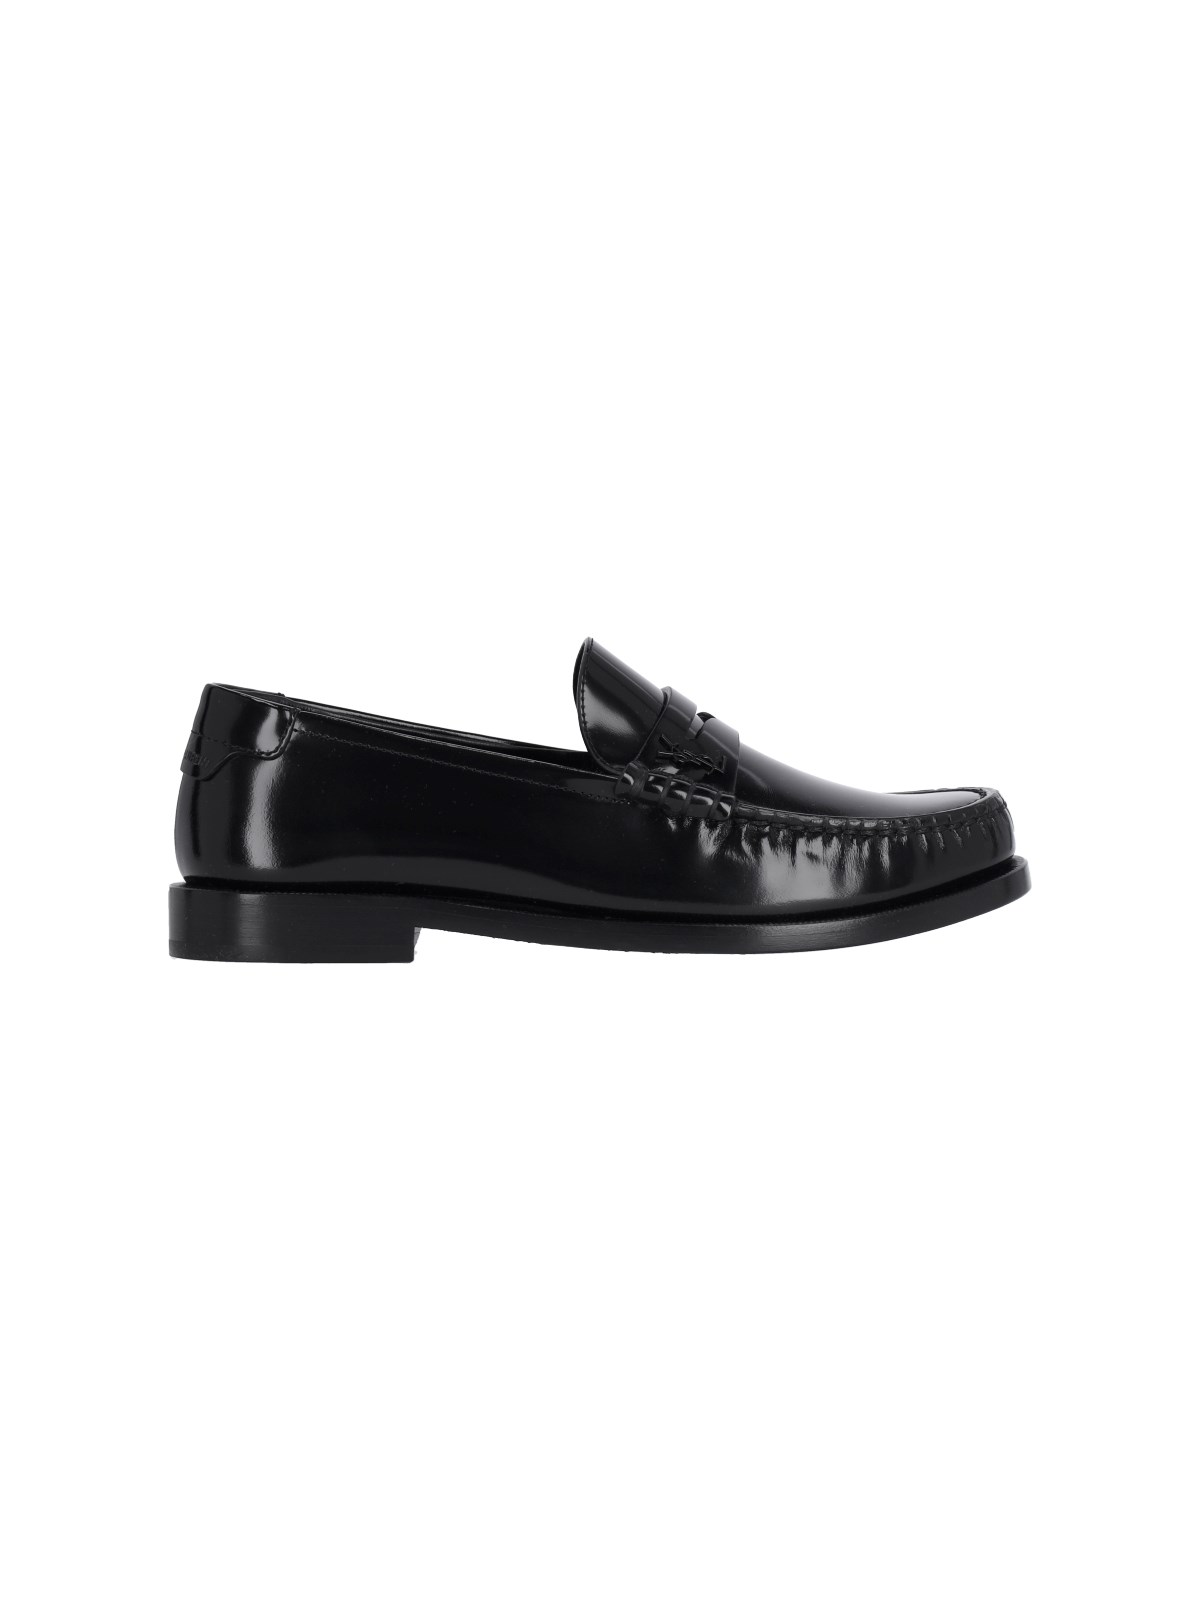 Shop Saint Laurent Loafers "the Loafers" In Black  